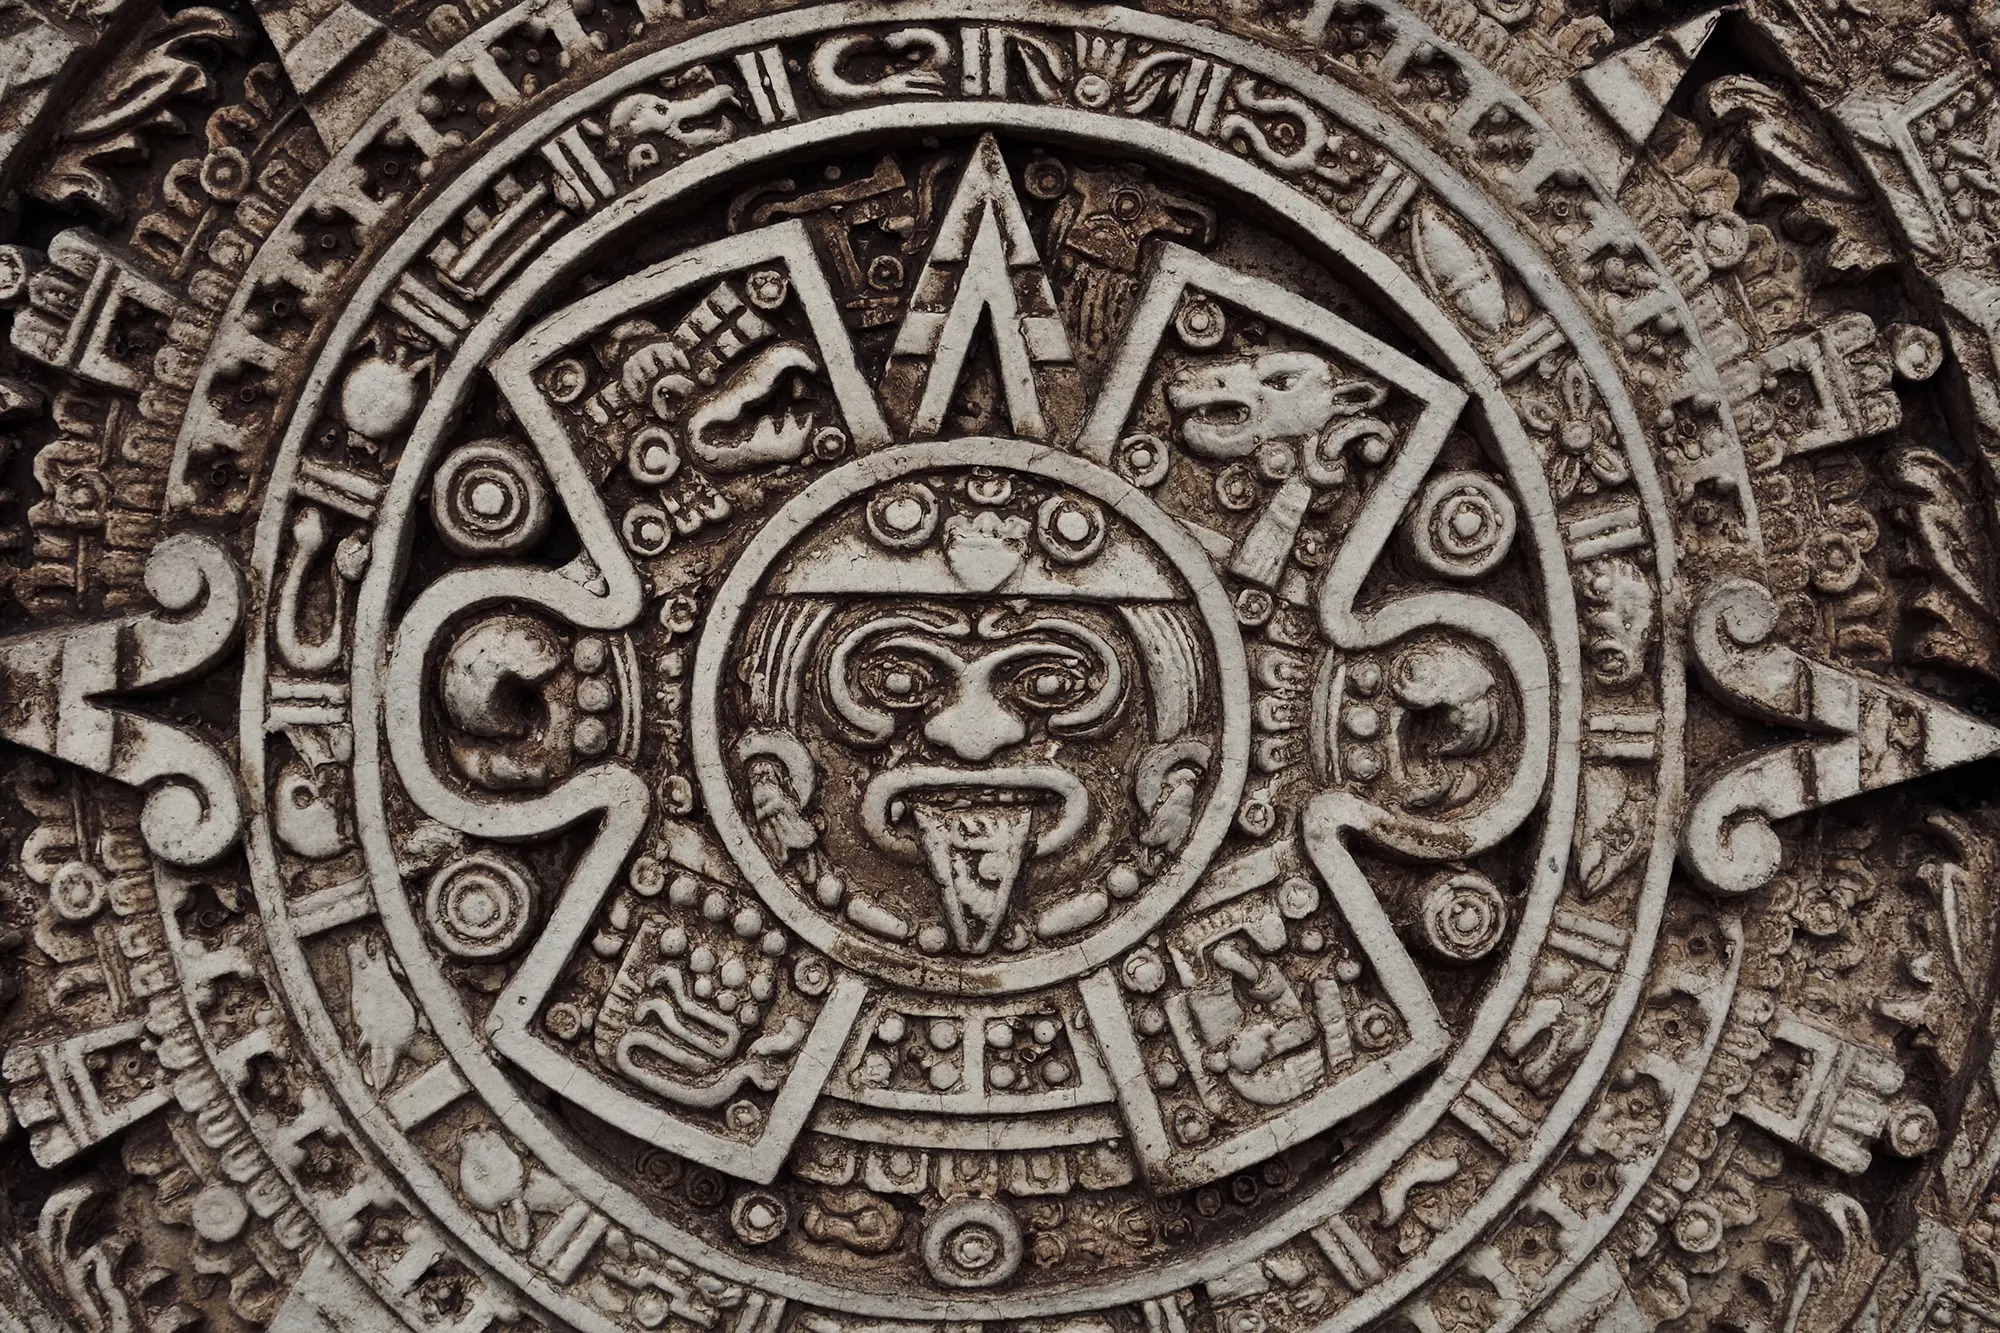 The Mayan Calendar Facts, Theories and Prophecies